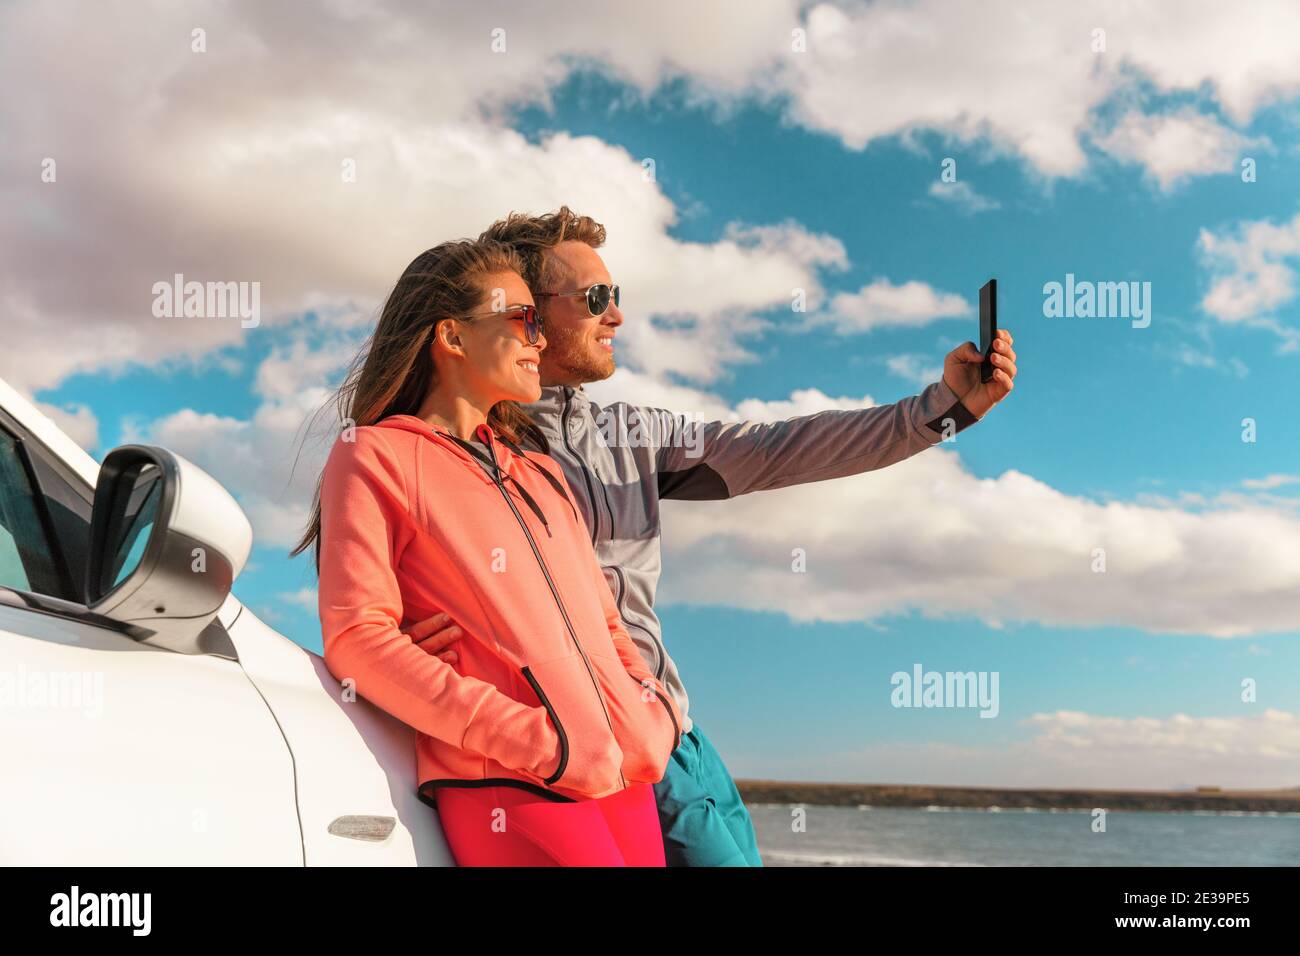 Selfie couple tourists on road trip travel taking photo with phone at summer vacation car rental. Young woman and man friends smiling in sunglasses Stock Photo